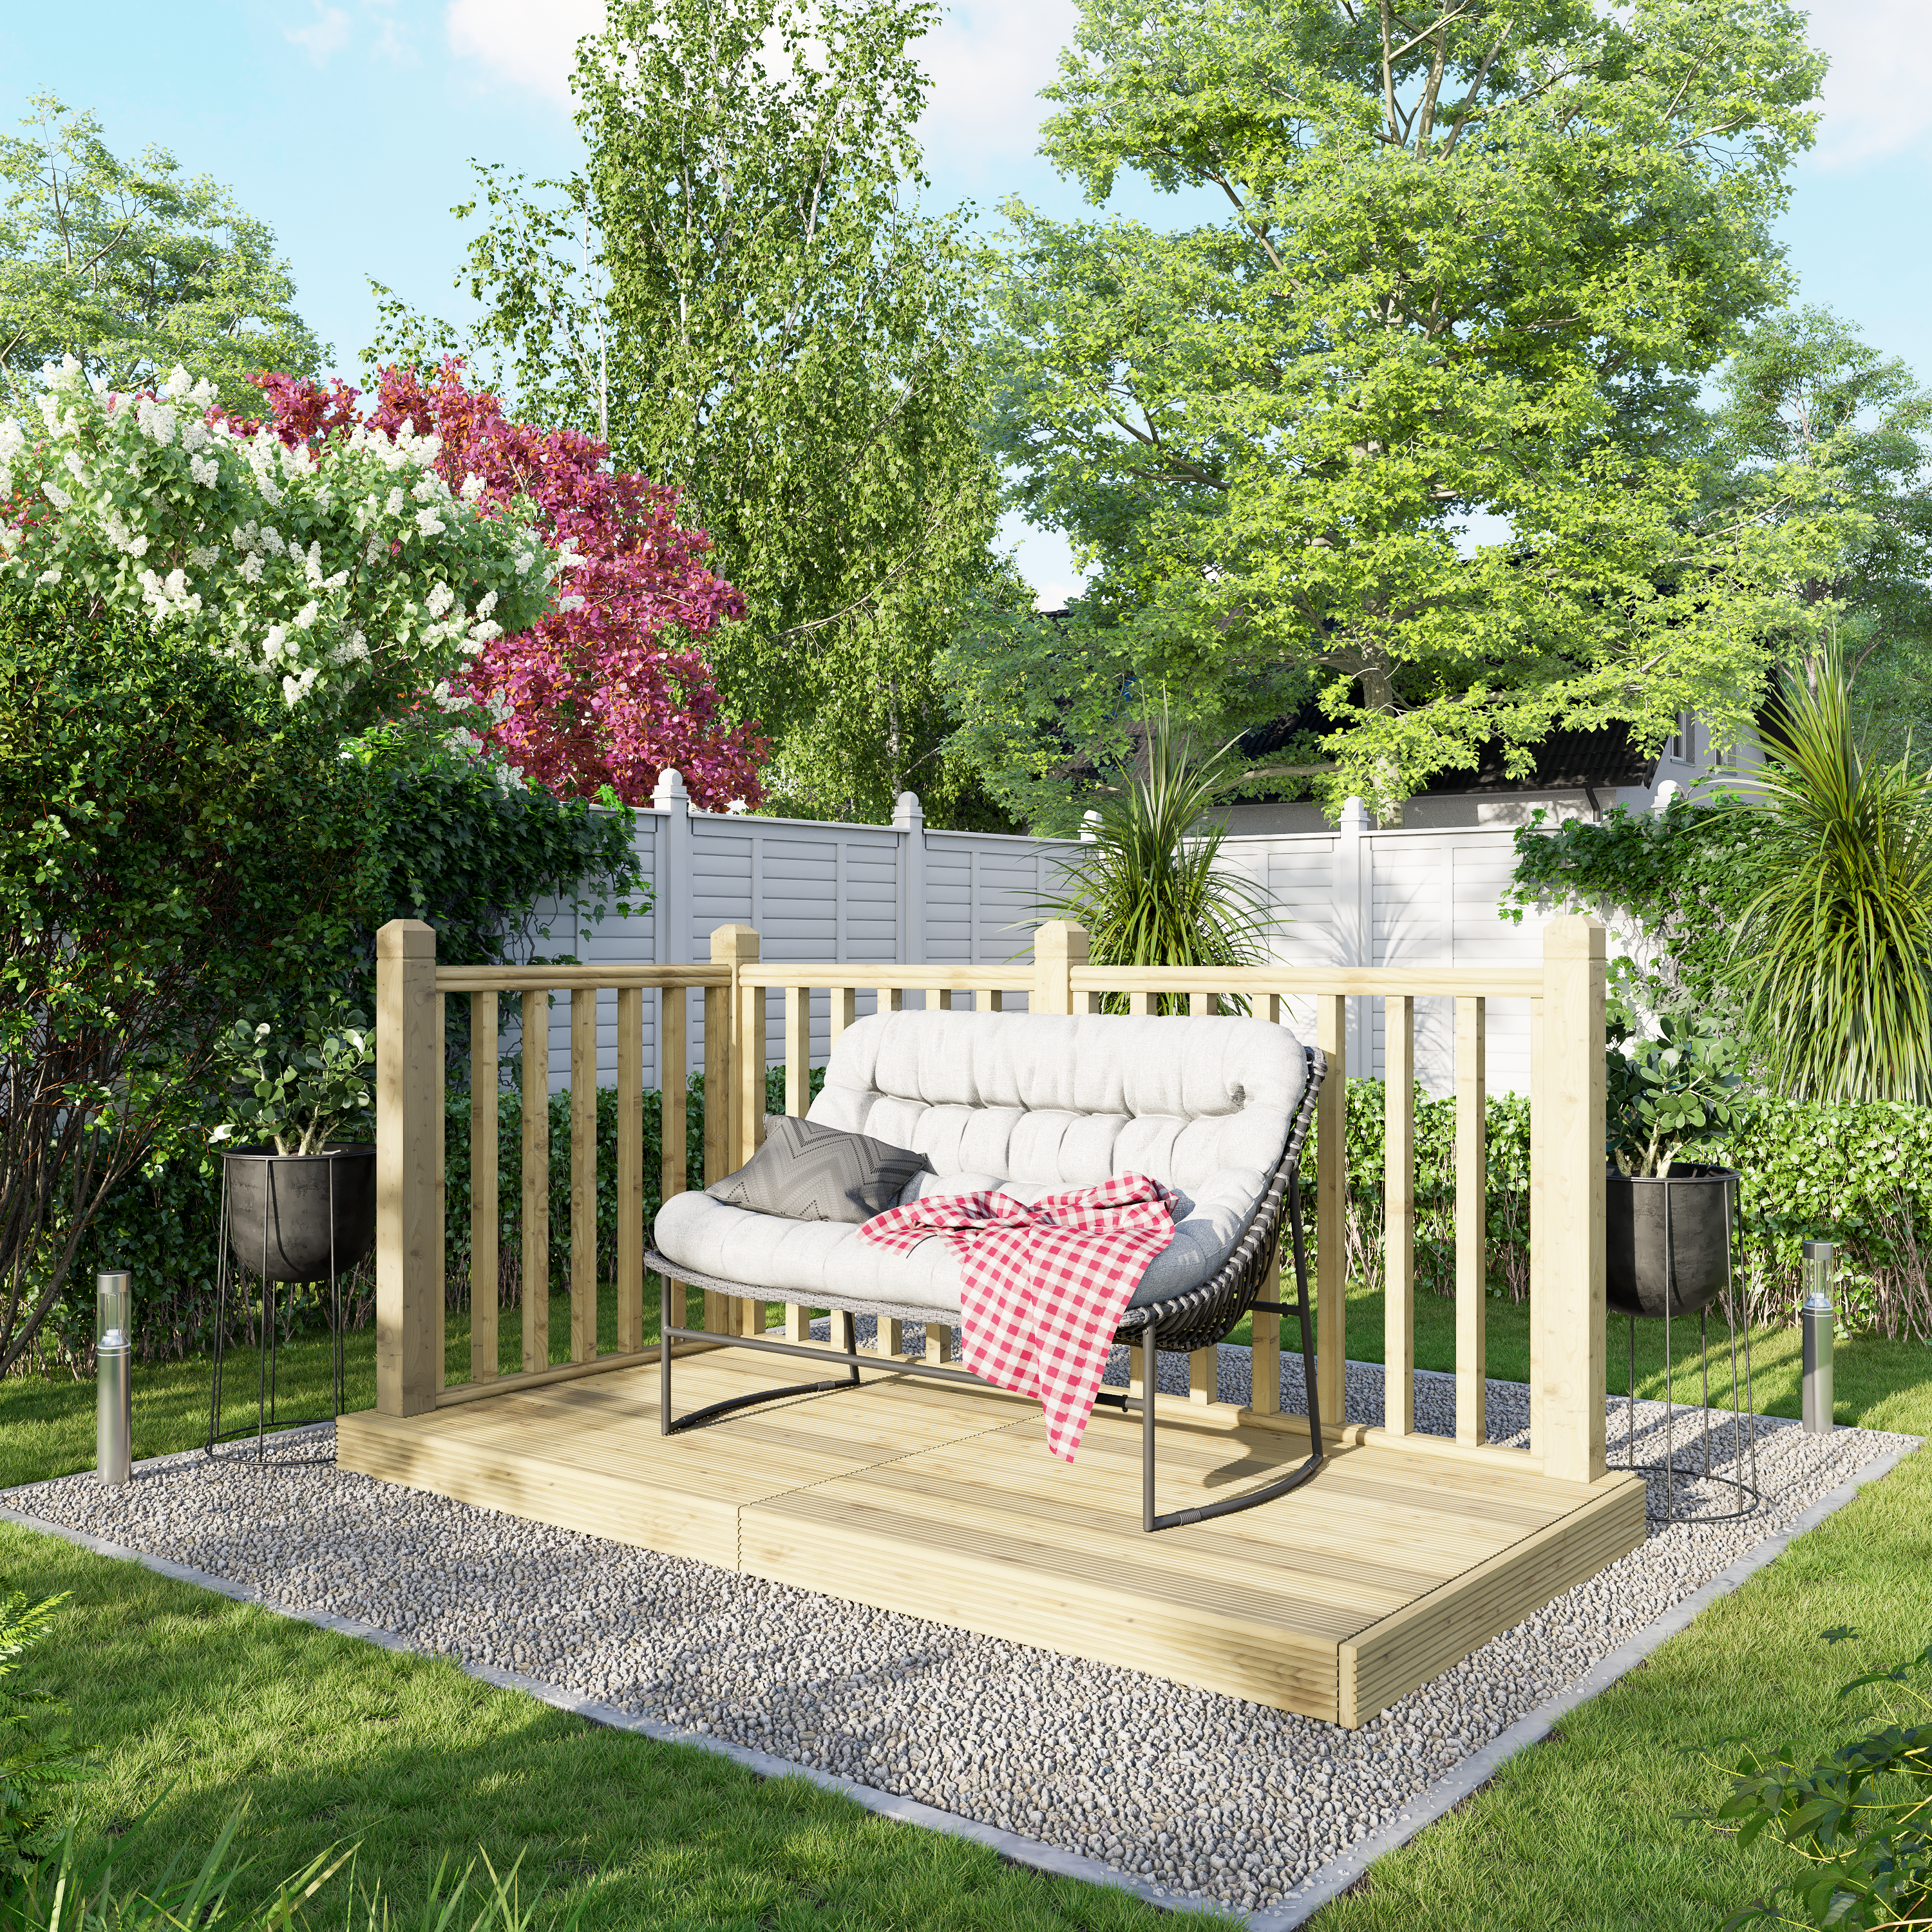 Image of Power Timber Decking Kit Handrails on Two Sides - 1.2 x 2.4m